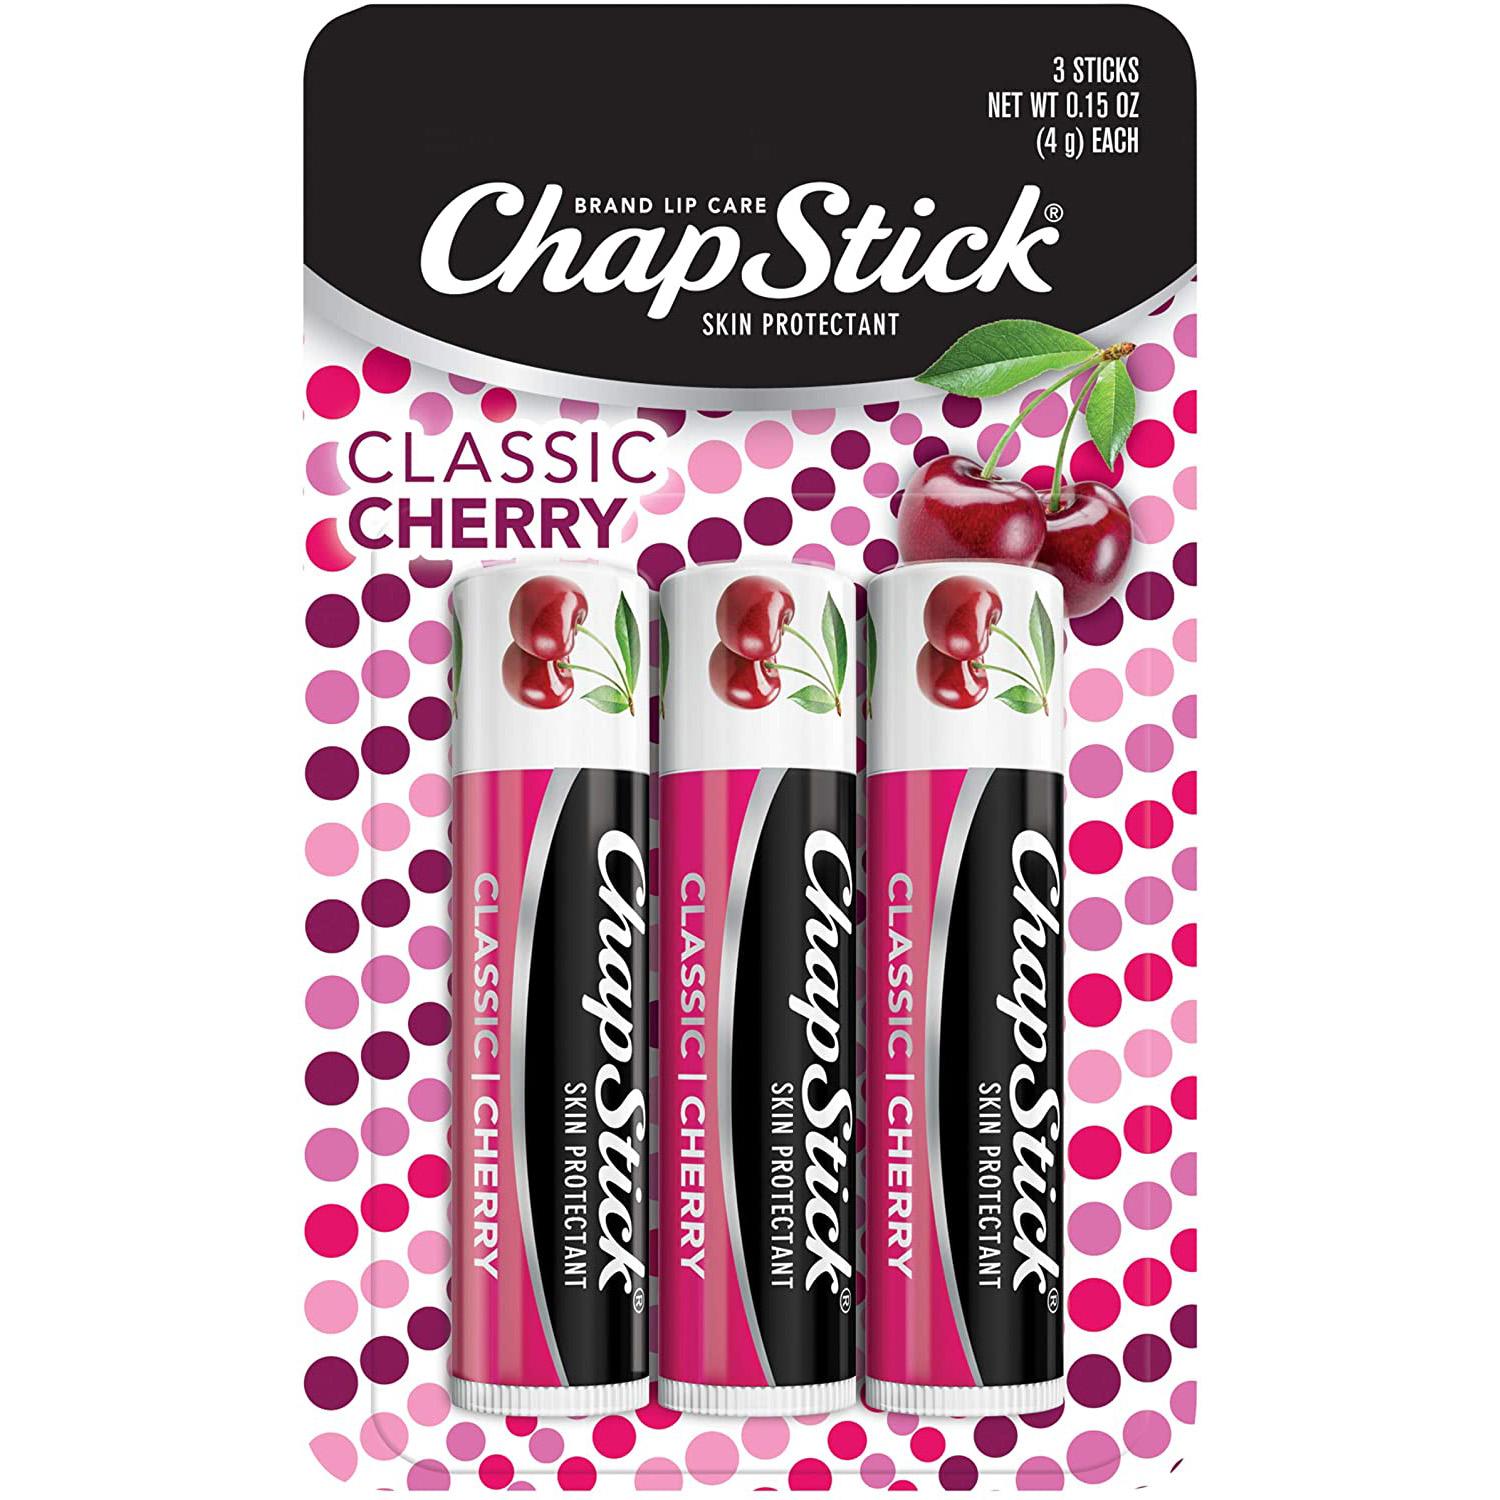 3 ChapStick Classic Skin Protectant Flavored Lip Balm Tubes for $1.90 Shipped